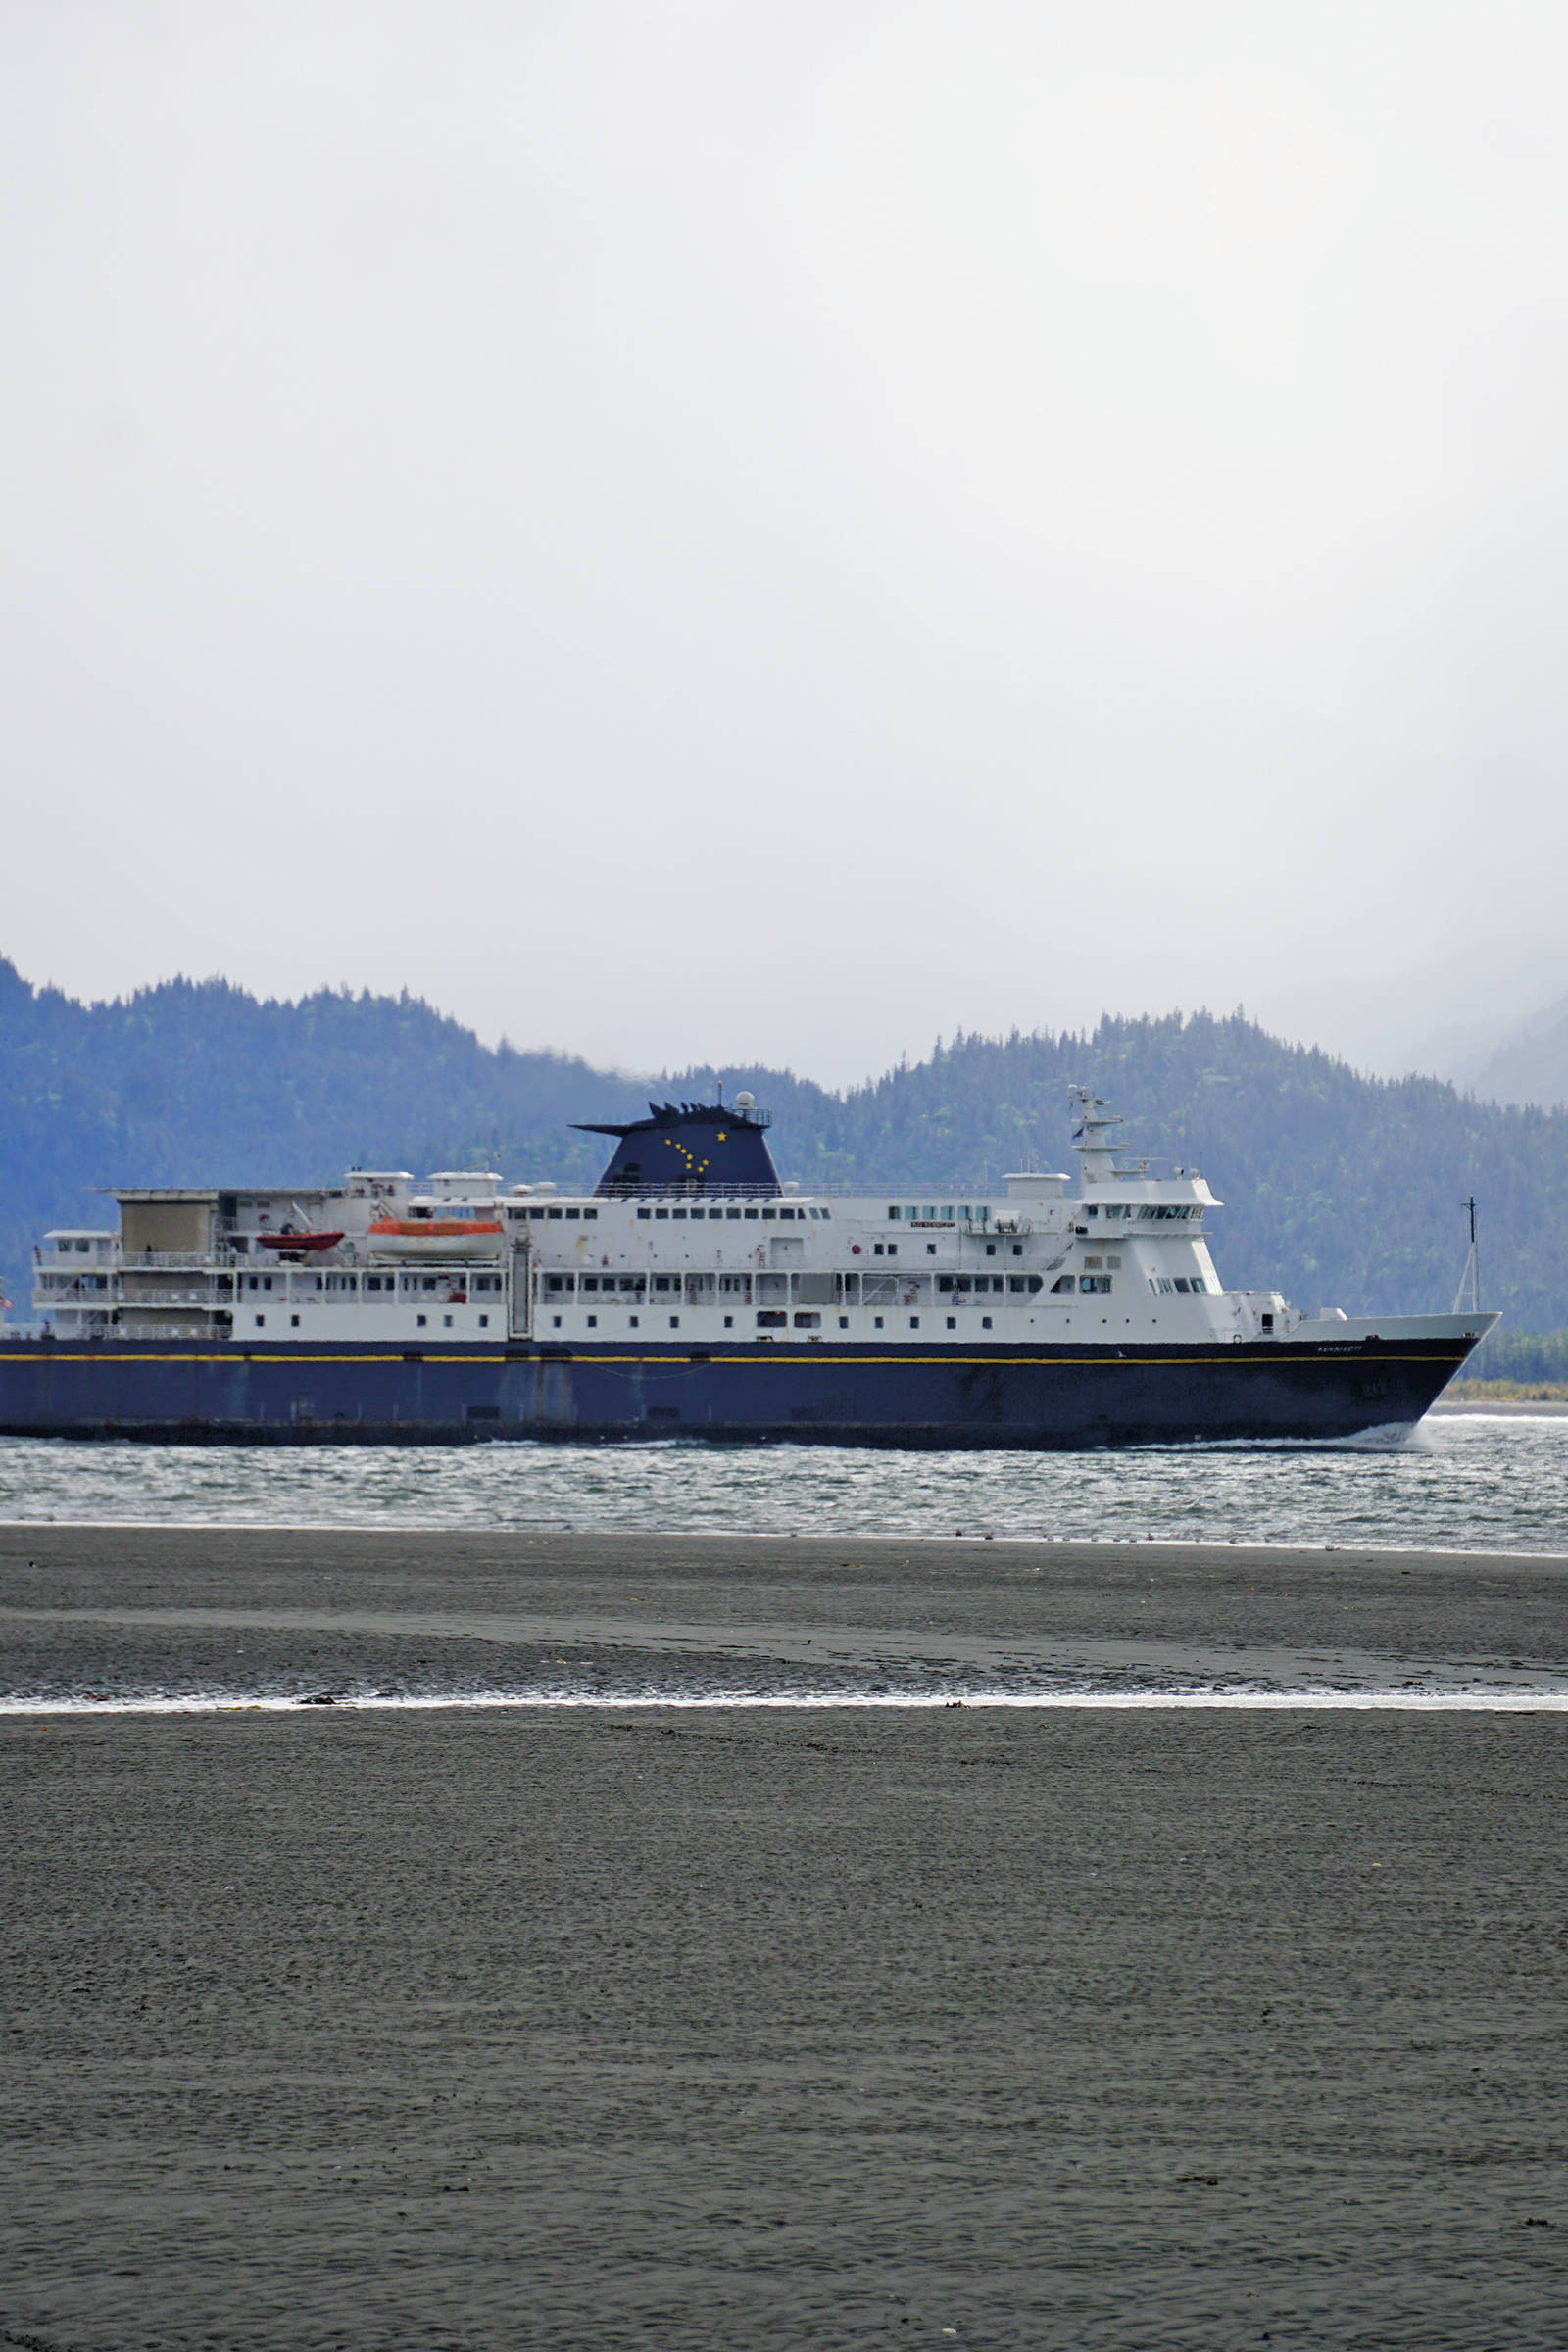 The M/V Kennicott leaves on Sept. 1, 2019, out of Homer, Alaska. (Photo by Michael Armstrong/Homer New)